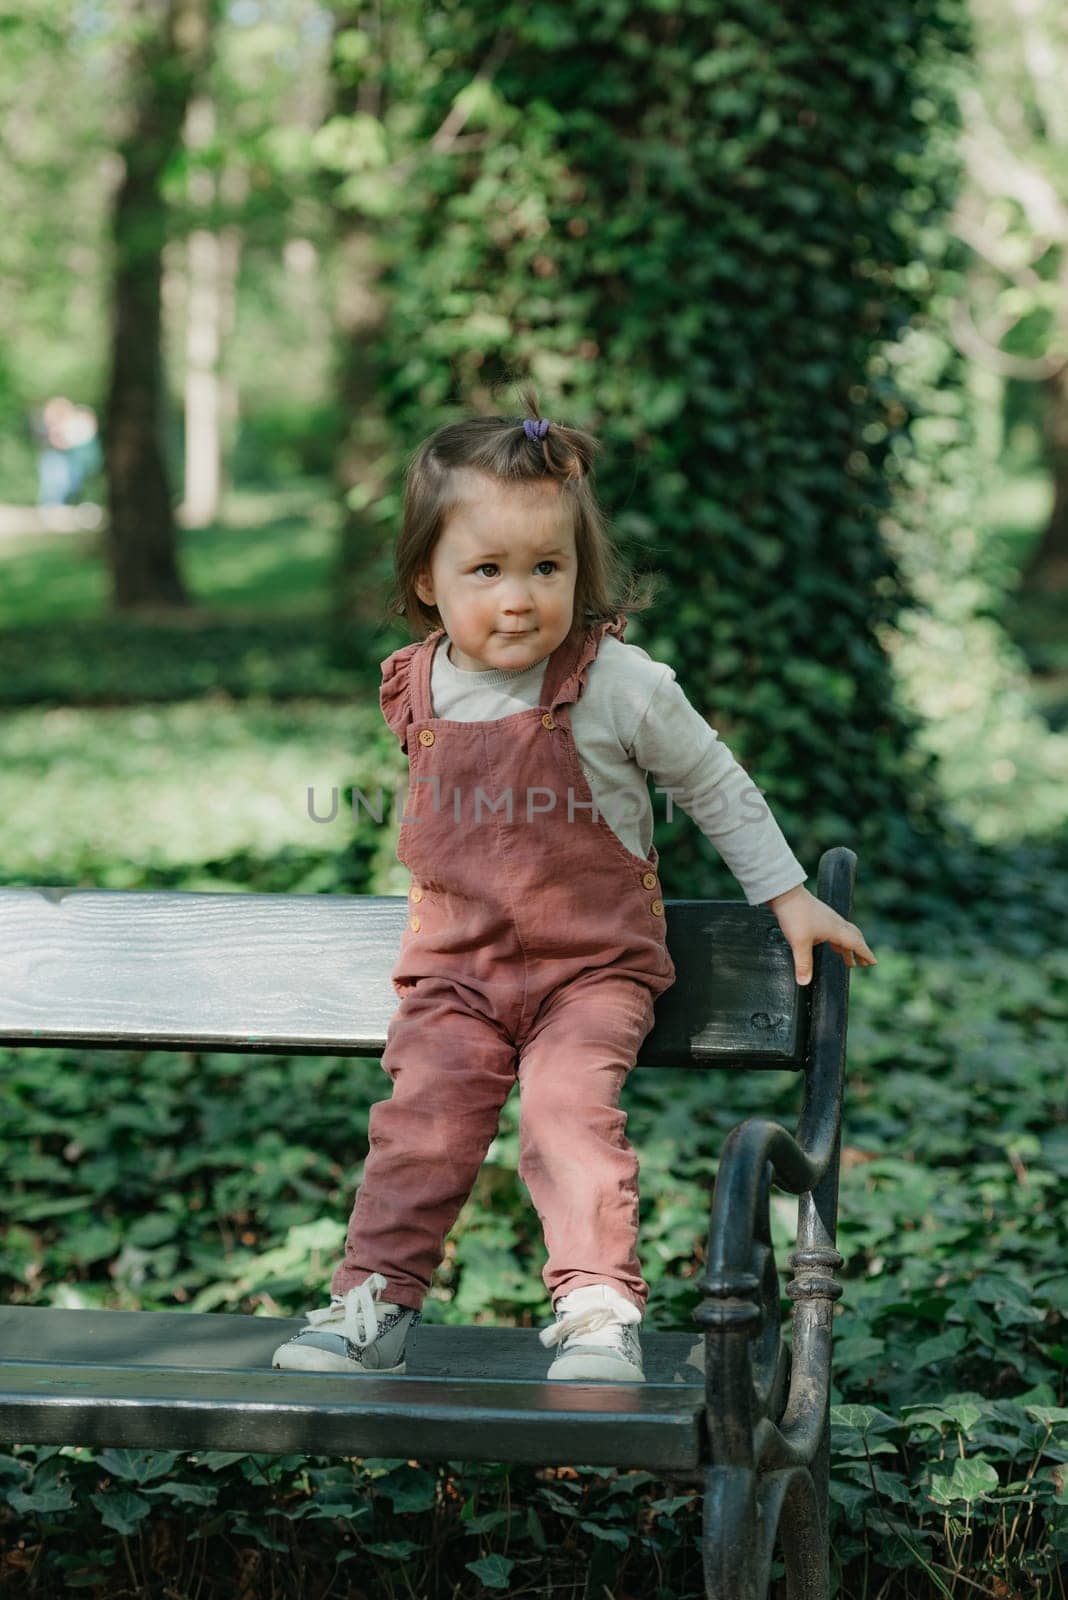 A female toddler in a velvet overall holds is on the garden bench. A baby girl with a small ponytail is having fun in the park.